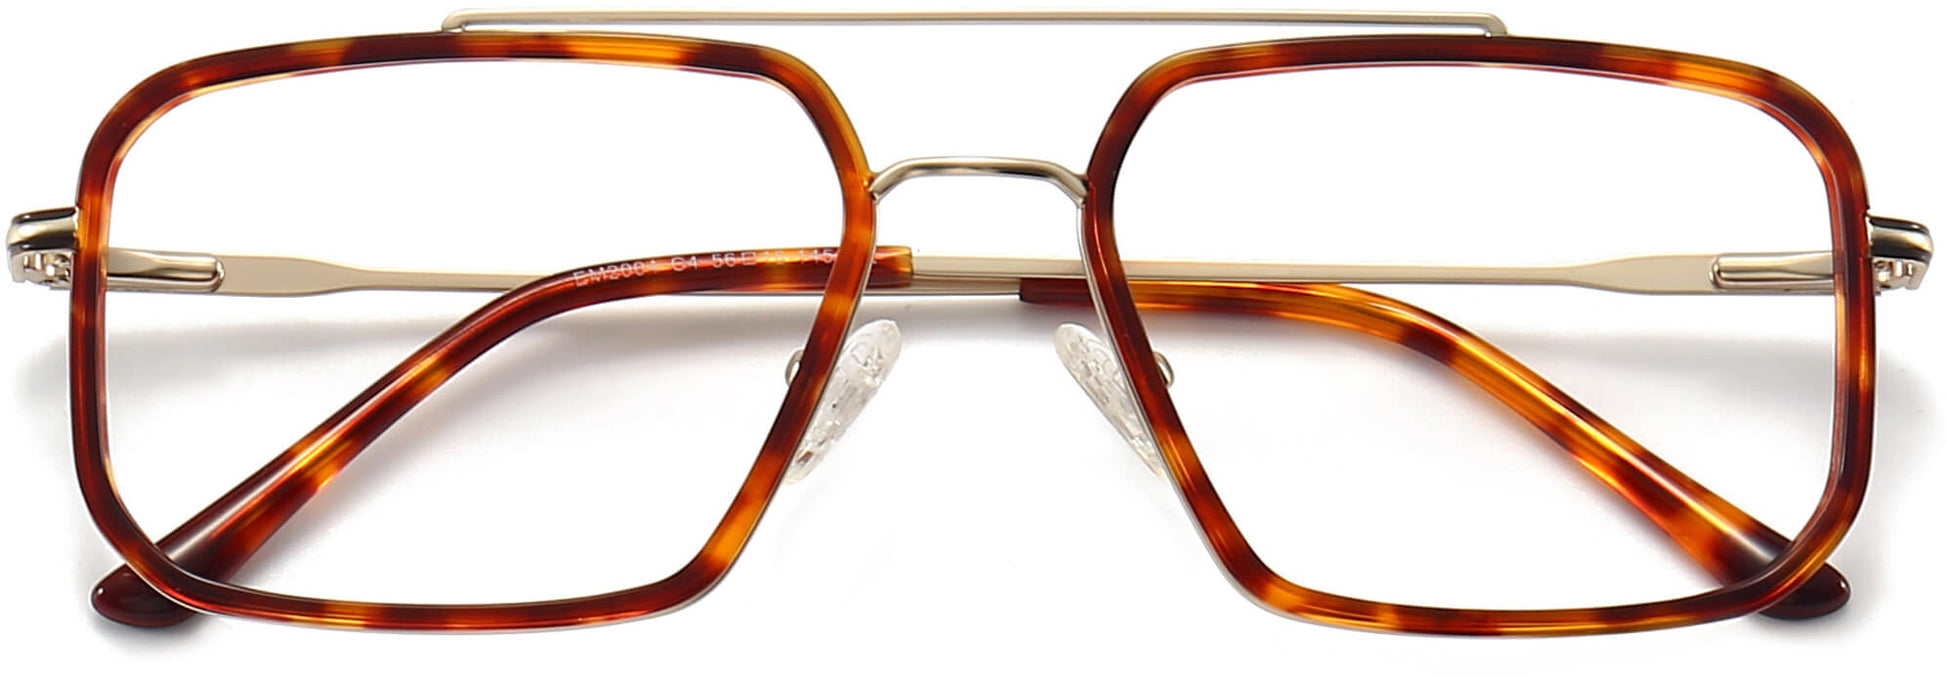 Saul Square Tortoise Eyeglasses from ANRRI, closed view